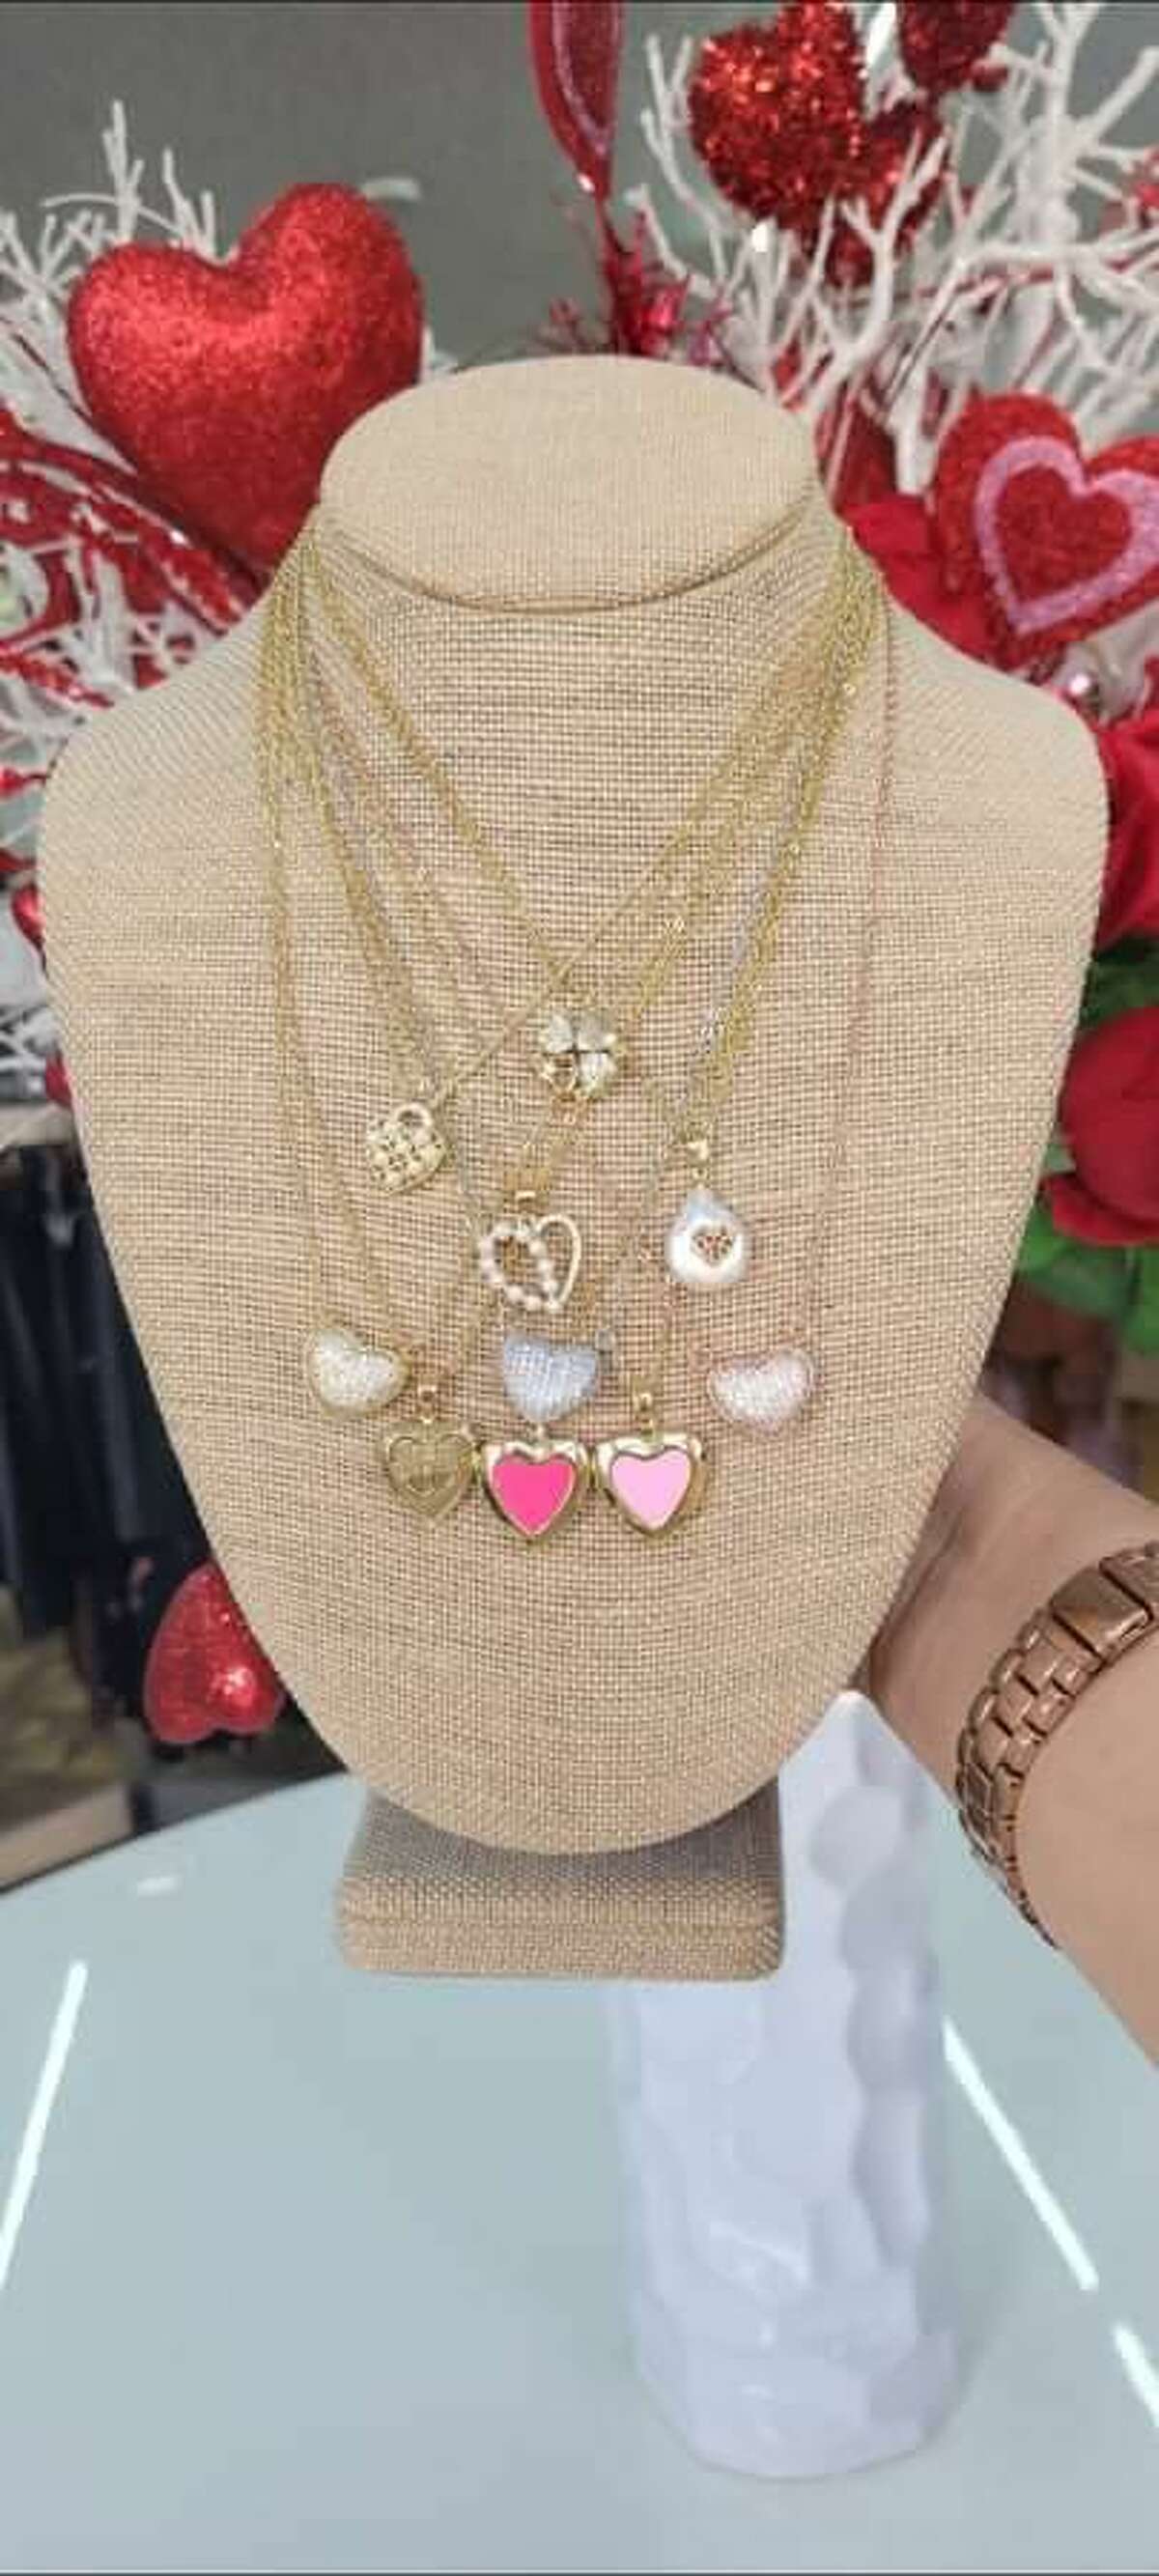 Pendants are showcased at Daisy’s Boutique in downtown Laredo.